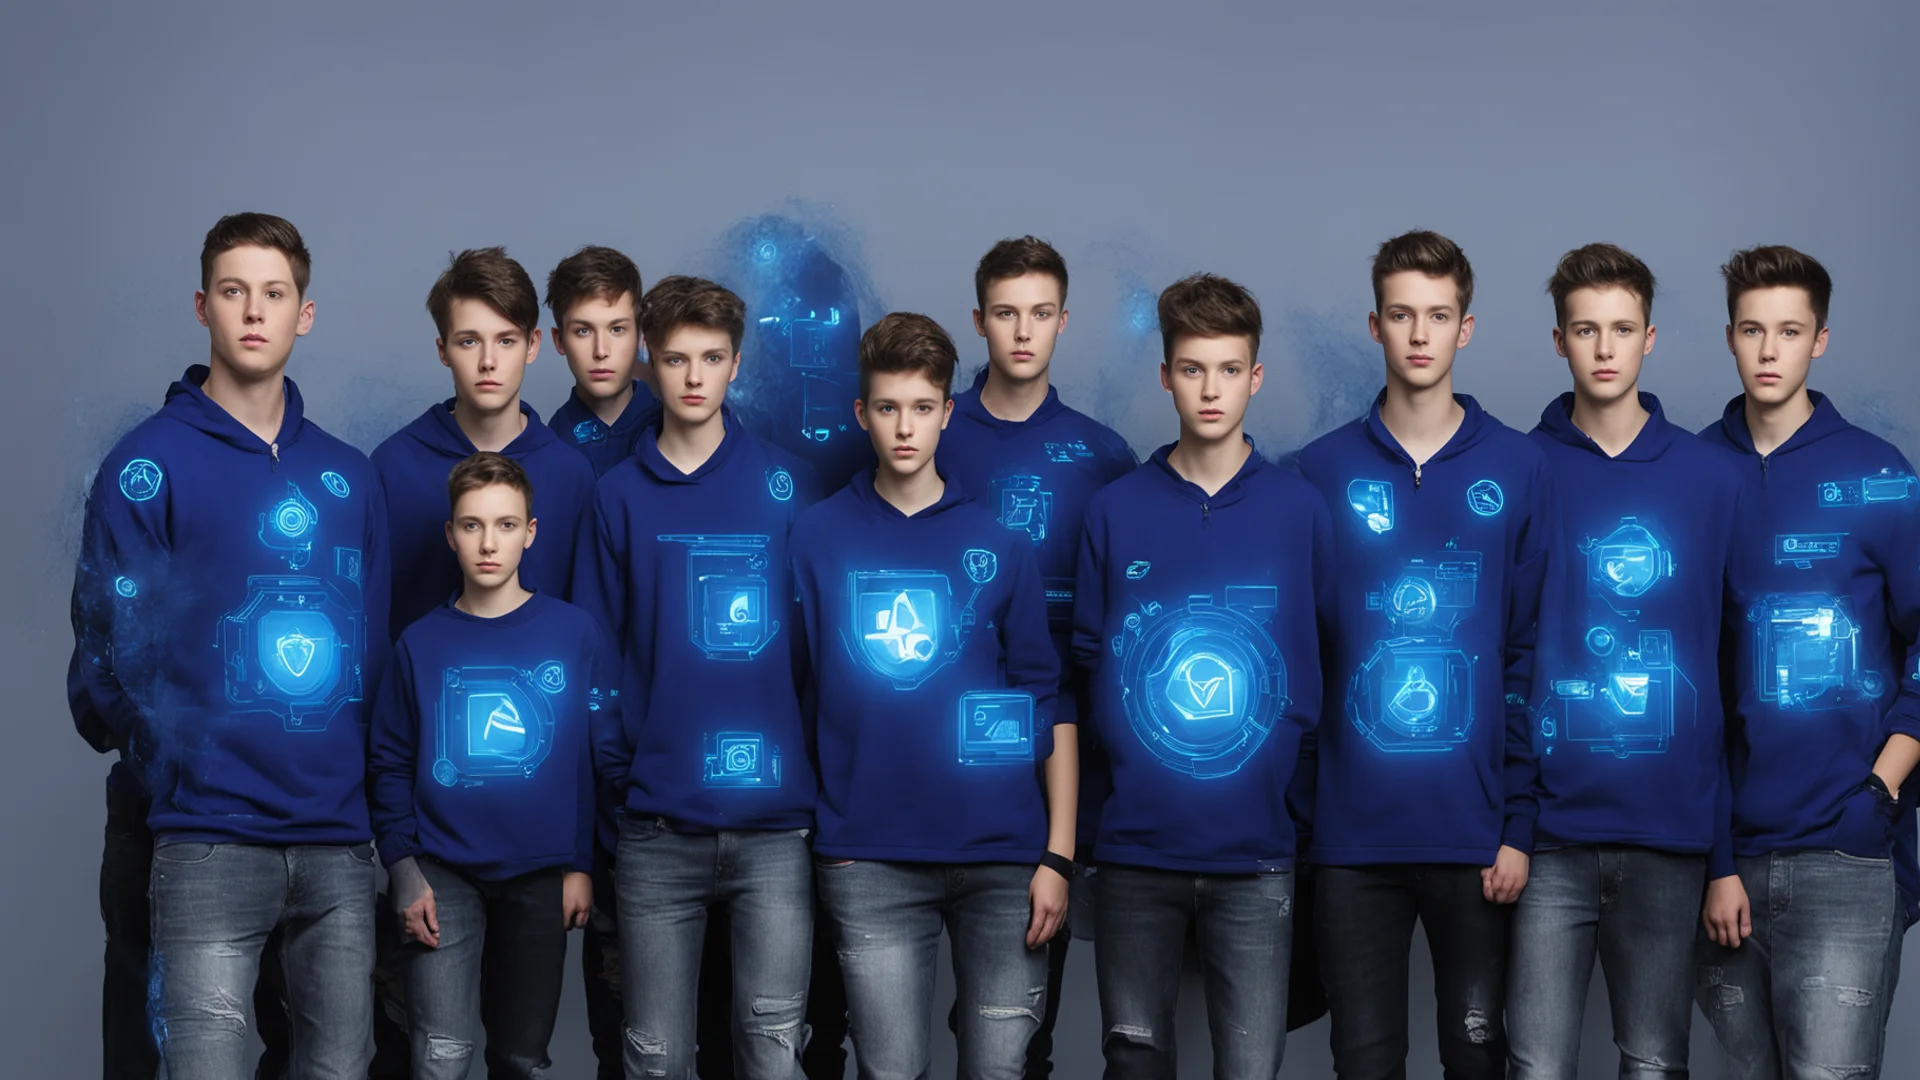 cybersecurity blue team amazing awesome portrait 2 wide